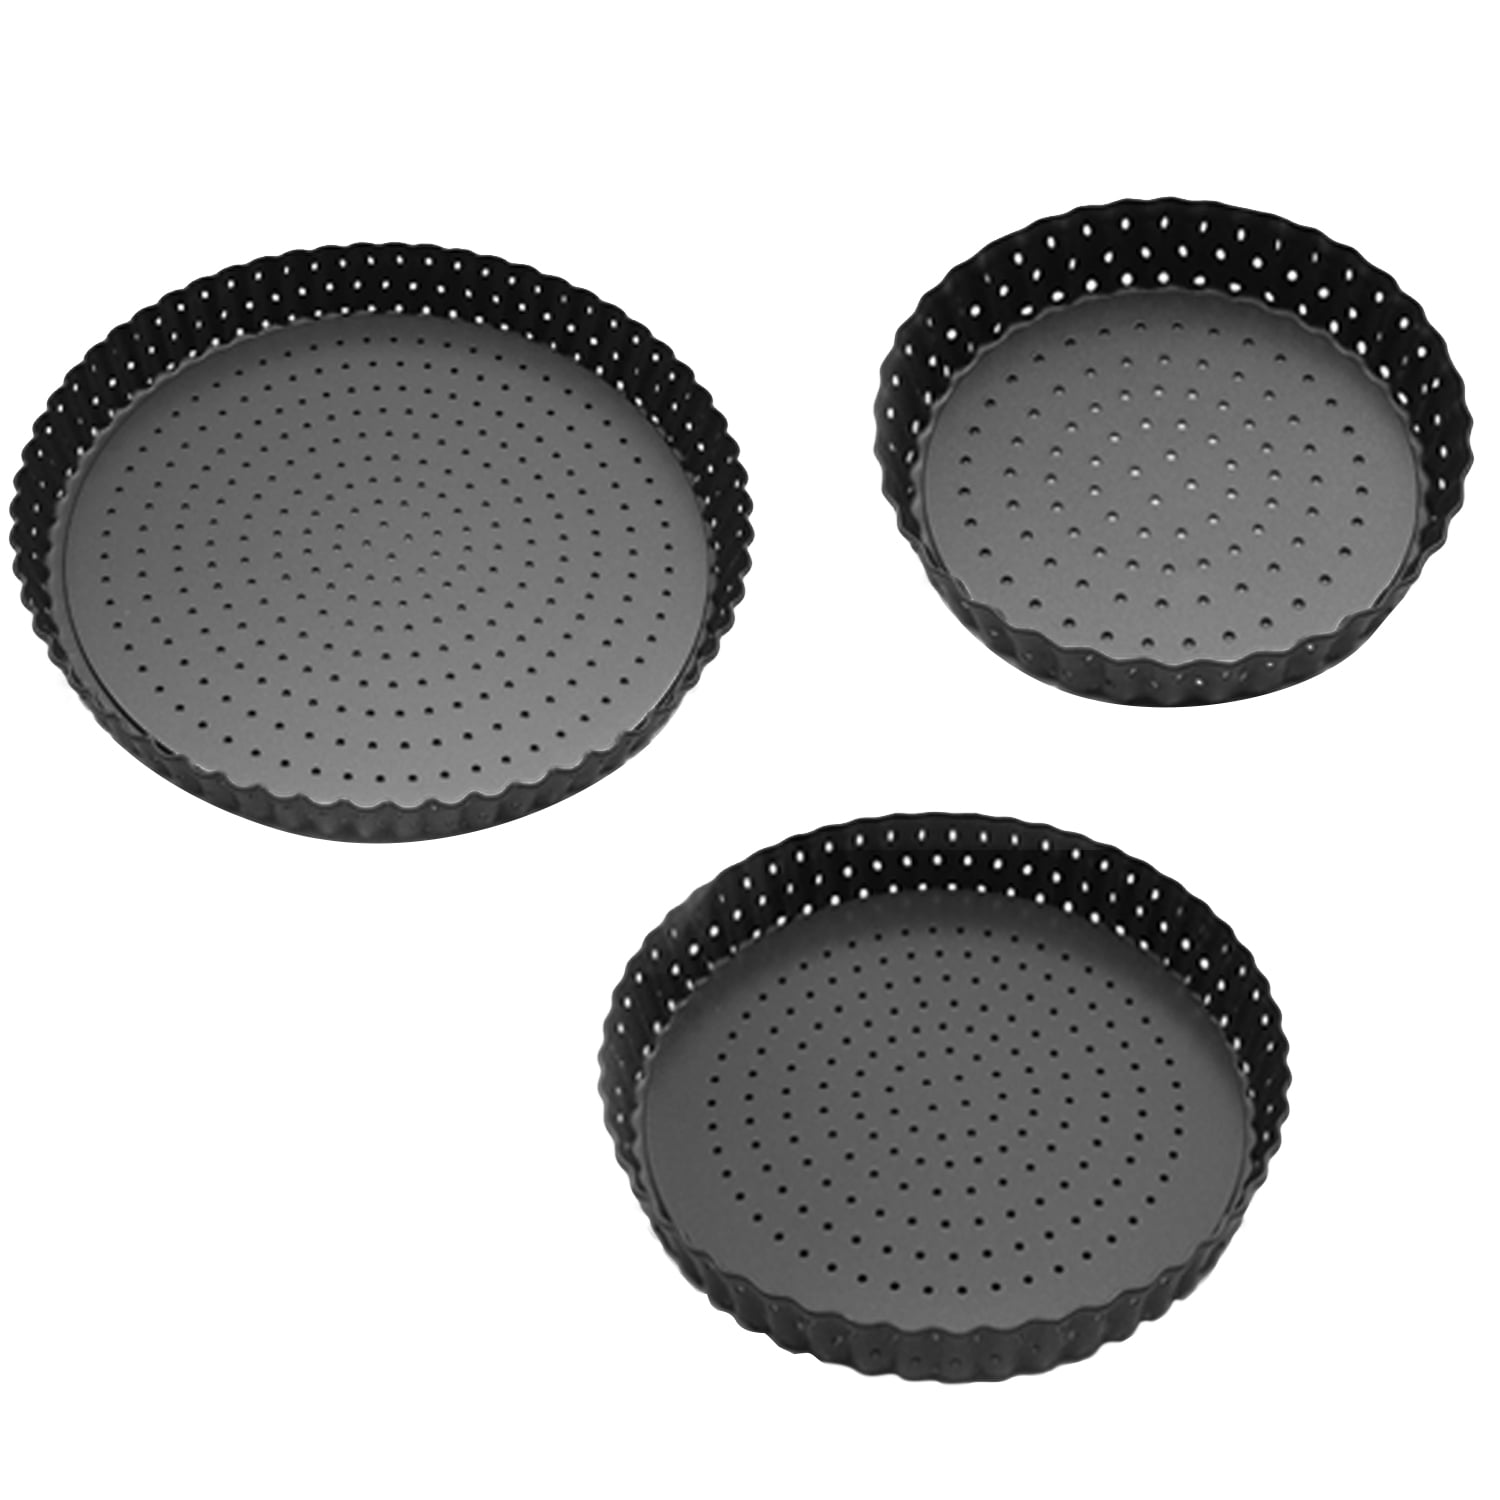 Kids PIZZA Pan Small Round Oven Tray Non Stick PIZZA TRAY 20cm Childrens Baking